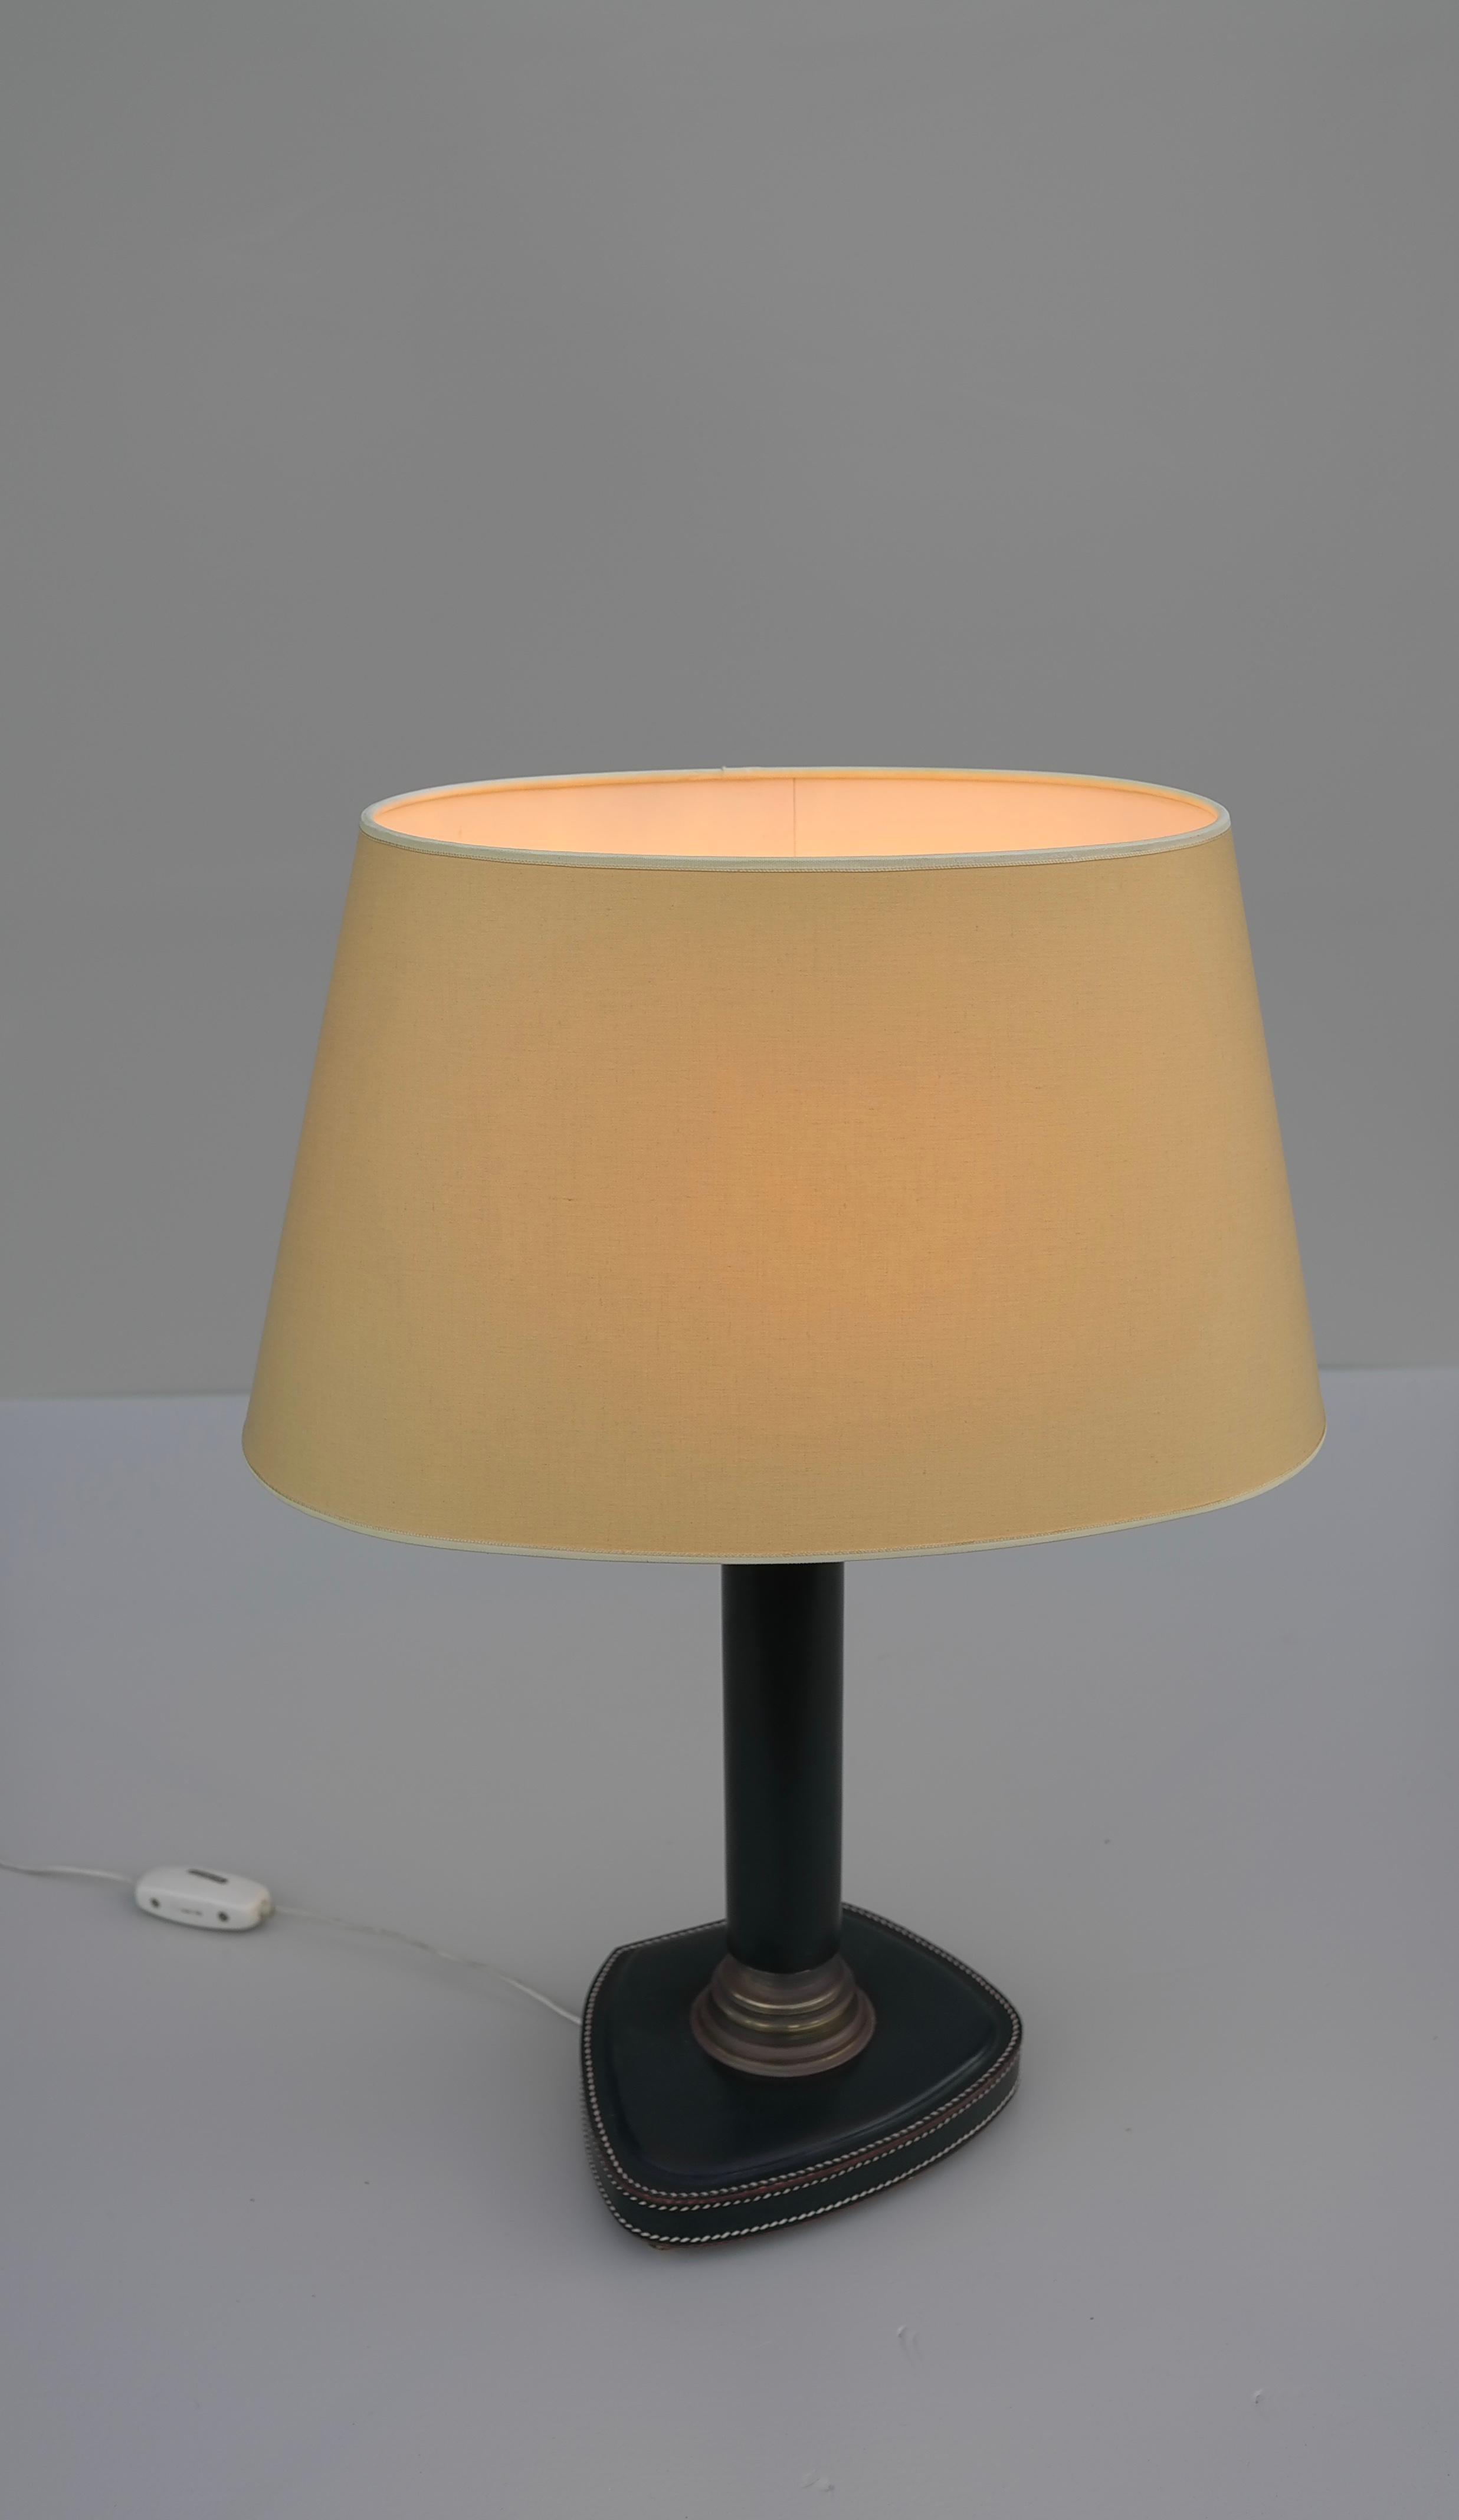 French Hand-Stitched Green Leather Table Lamp, France, 1960s For Sale